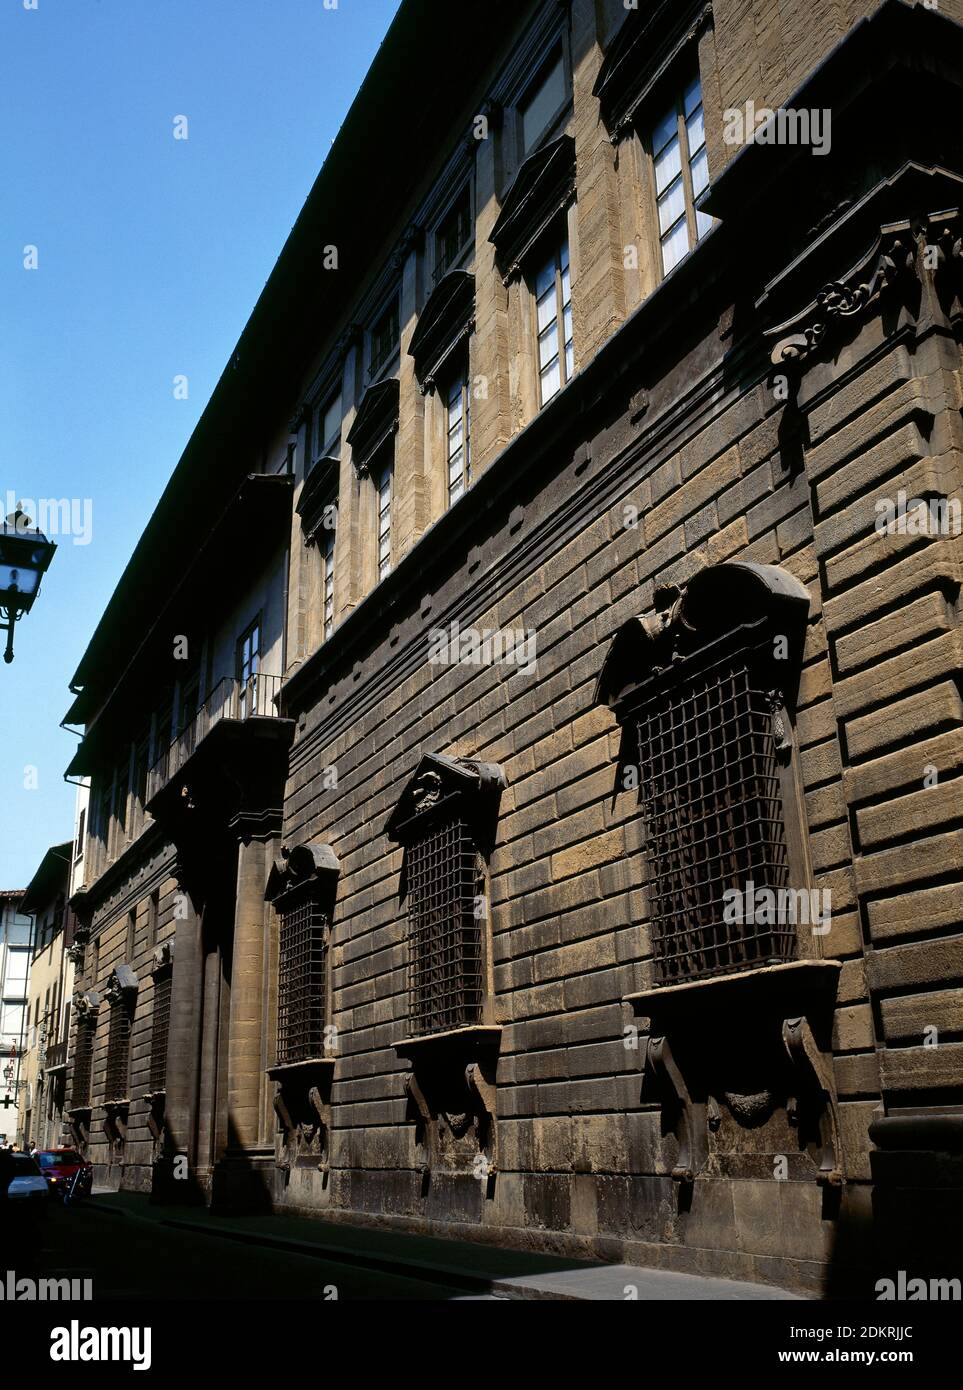 Italy, Tuscany, Florence. Palazzo Nonfinito (Unfinished Palace). Mannerist style. Bernardo Buontalenti designed it in 1593 for the Strozzi family. He built only the courtyard and the first floor. Additional construccion was added later by different architects. It houses the Anthropology and Ethnology section of the Museum of Natural History of Florence (National Museum of Mankind). Facade. Stock Photo